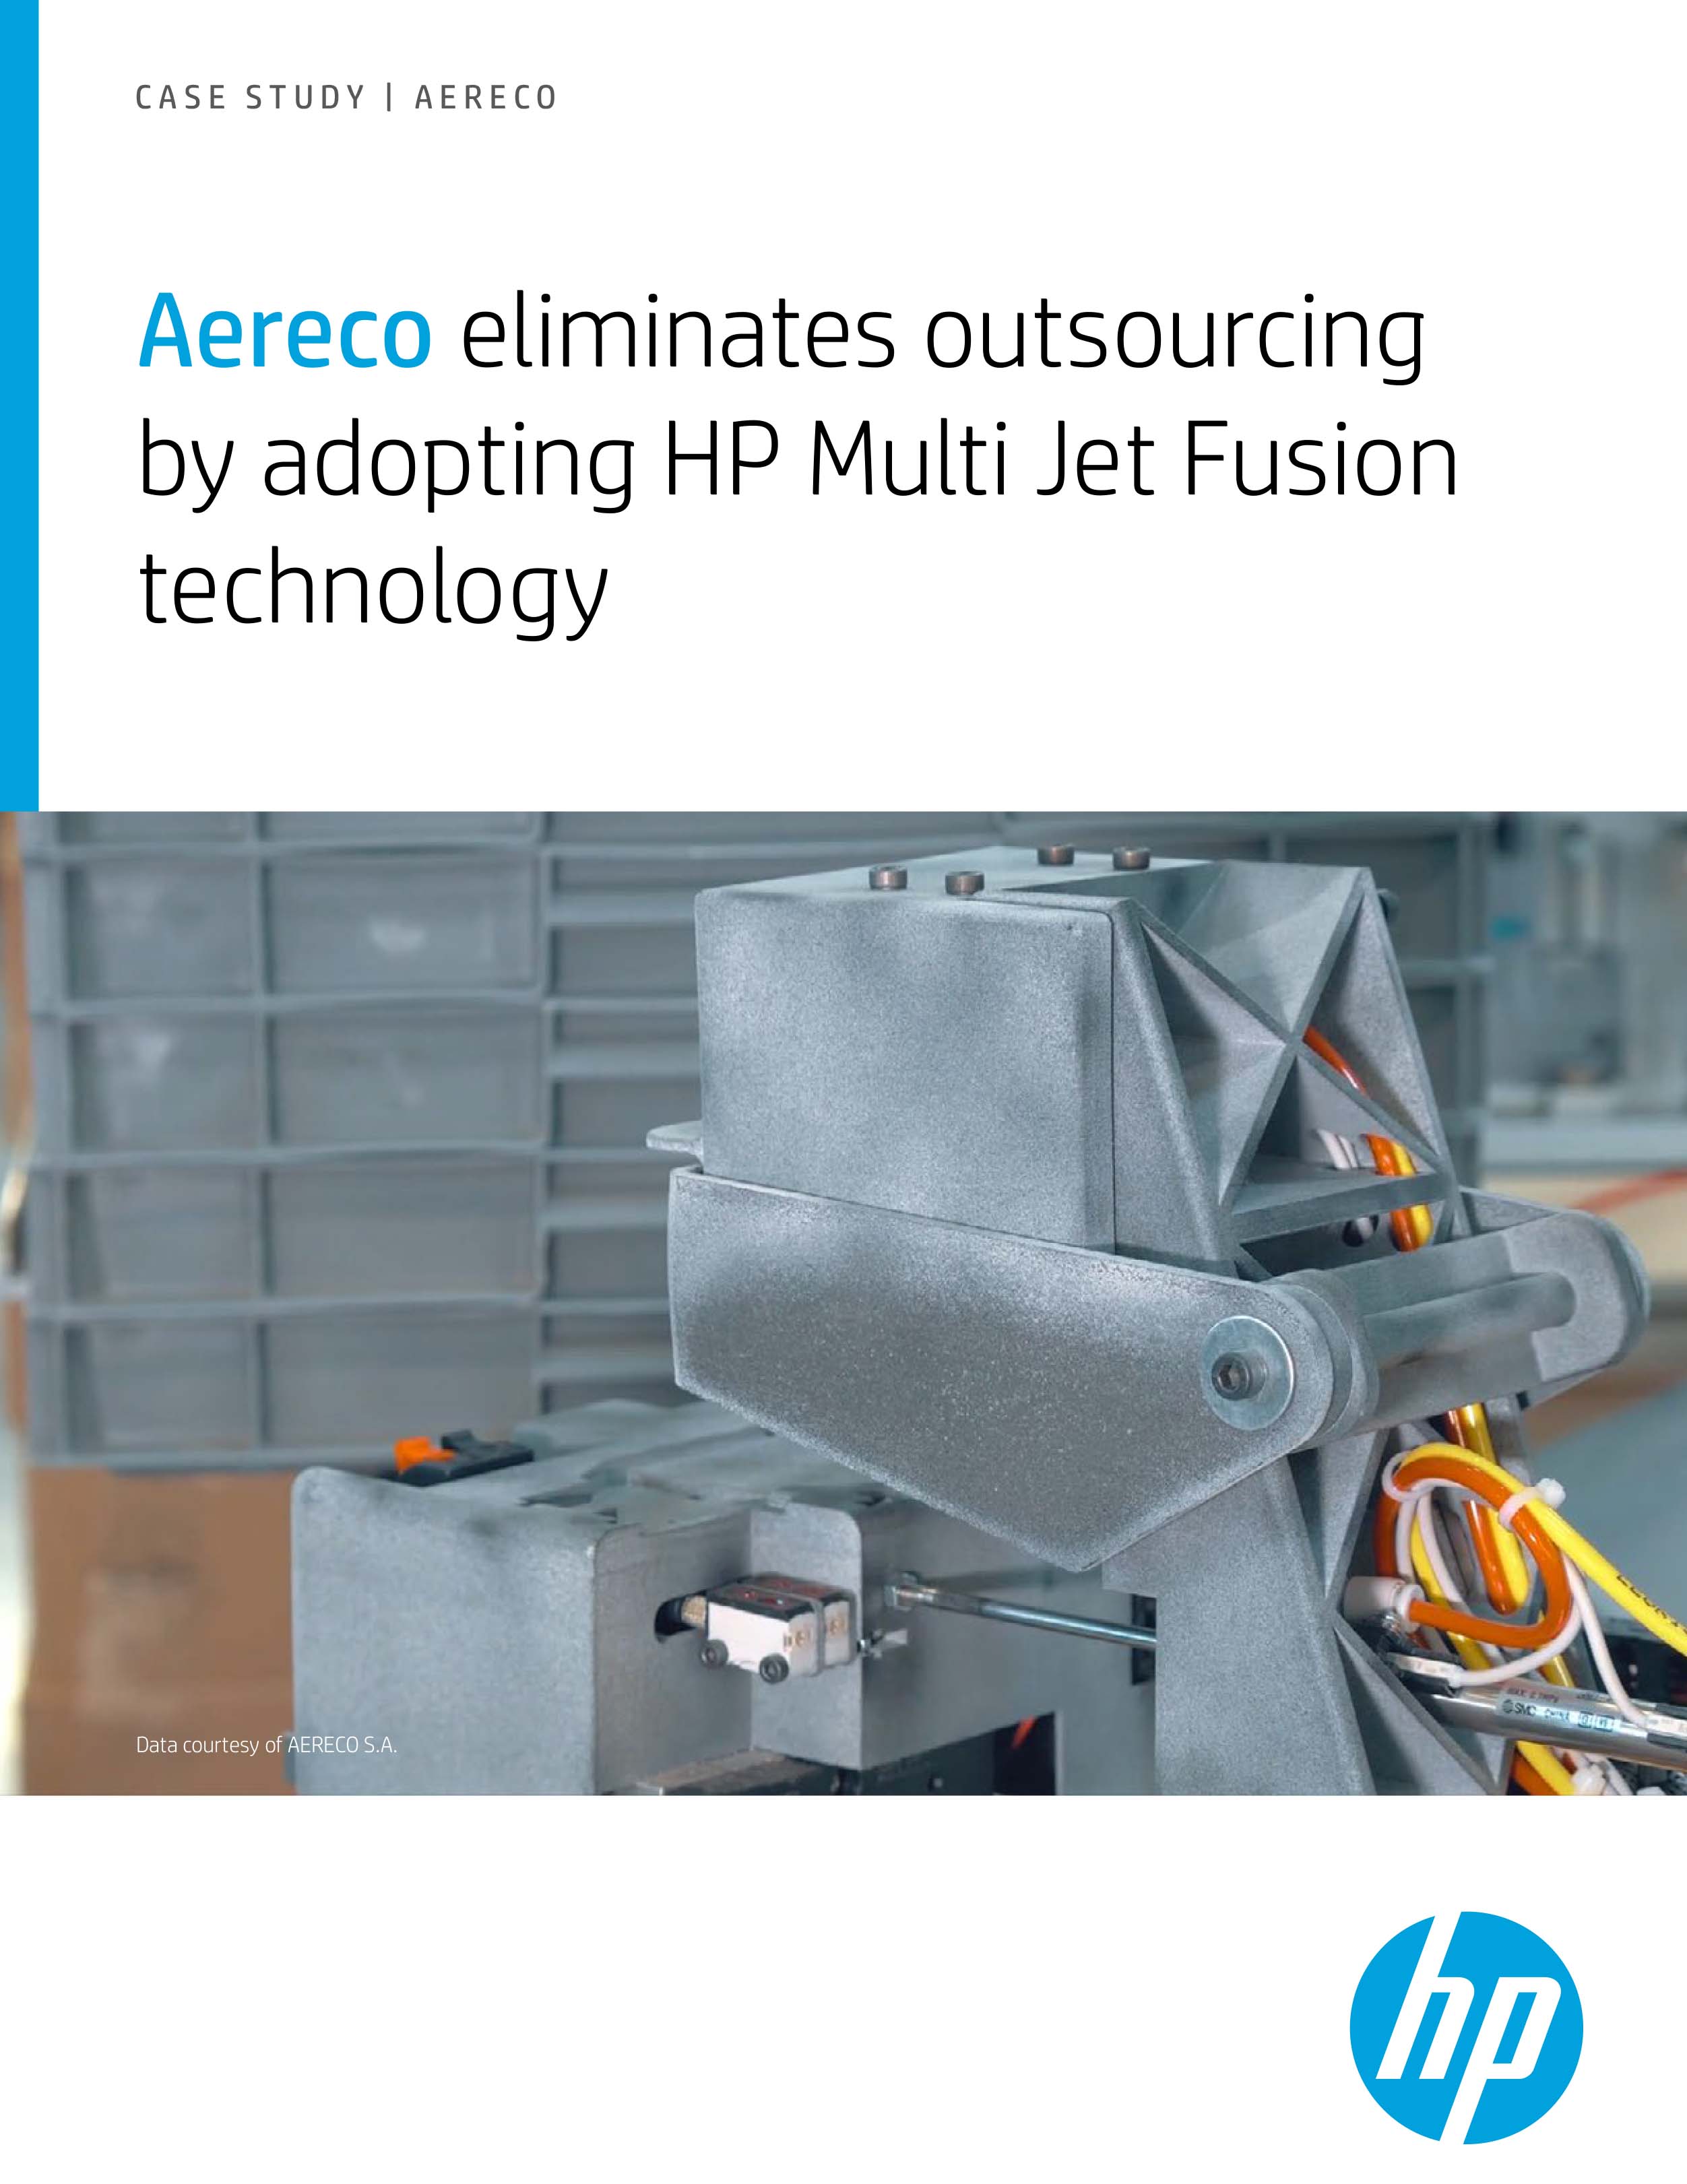 Aereco eliminates outsourcing by adopting HP Multi Jet Fusion technology